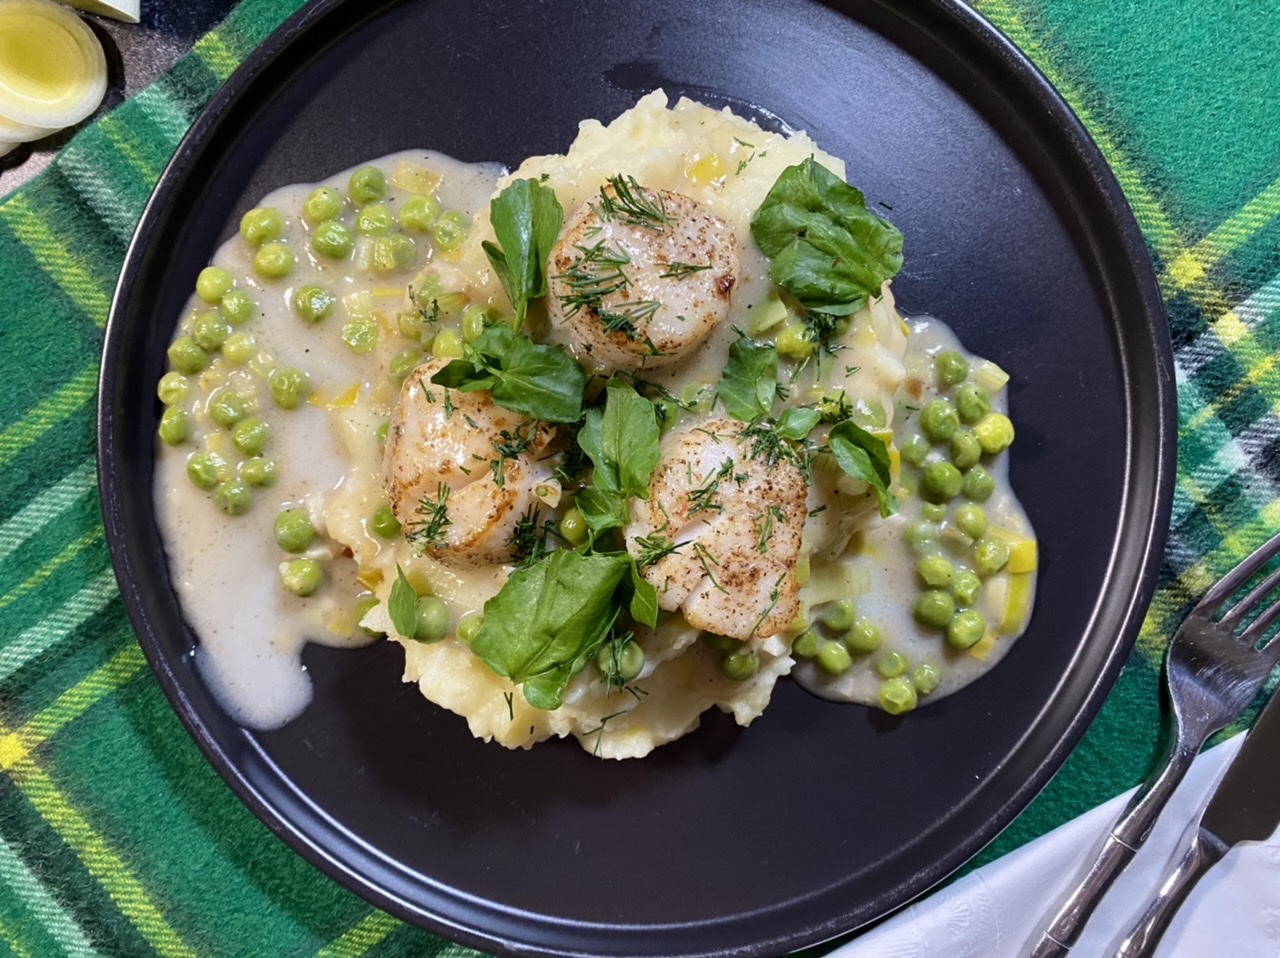 1F8756FE 93BC 4ED6 ADED 024A9A5A3F46 - Irish Scallops with Leeks and Peas over Mashed Potatoes